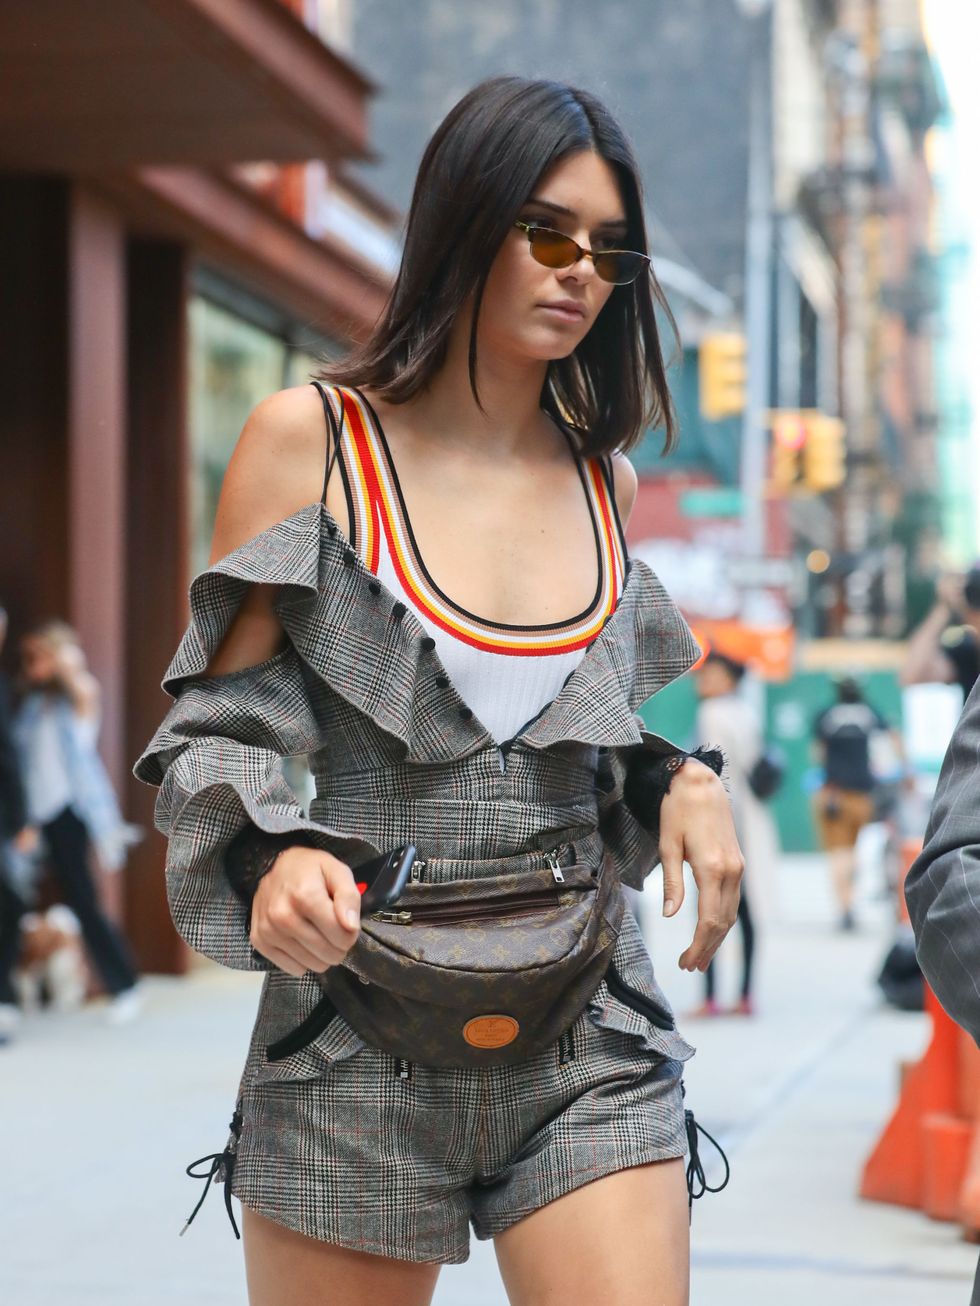 Another Day, Another Vintage Louis Vuitton Bag For Kendall Jenner